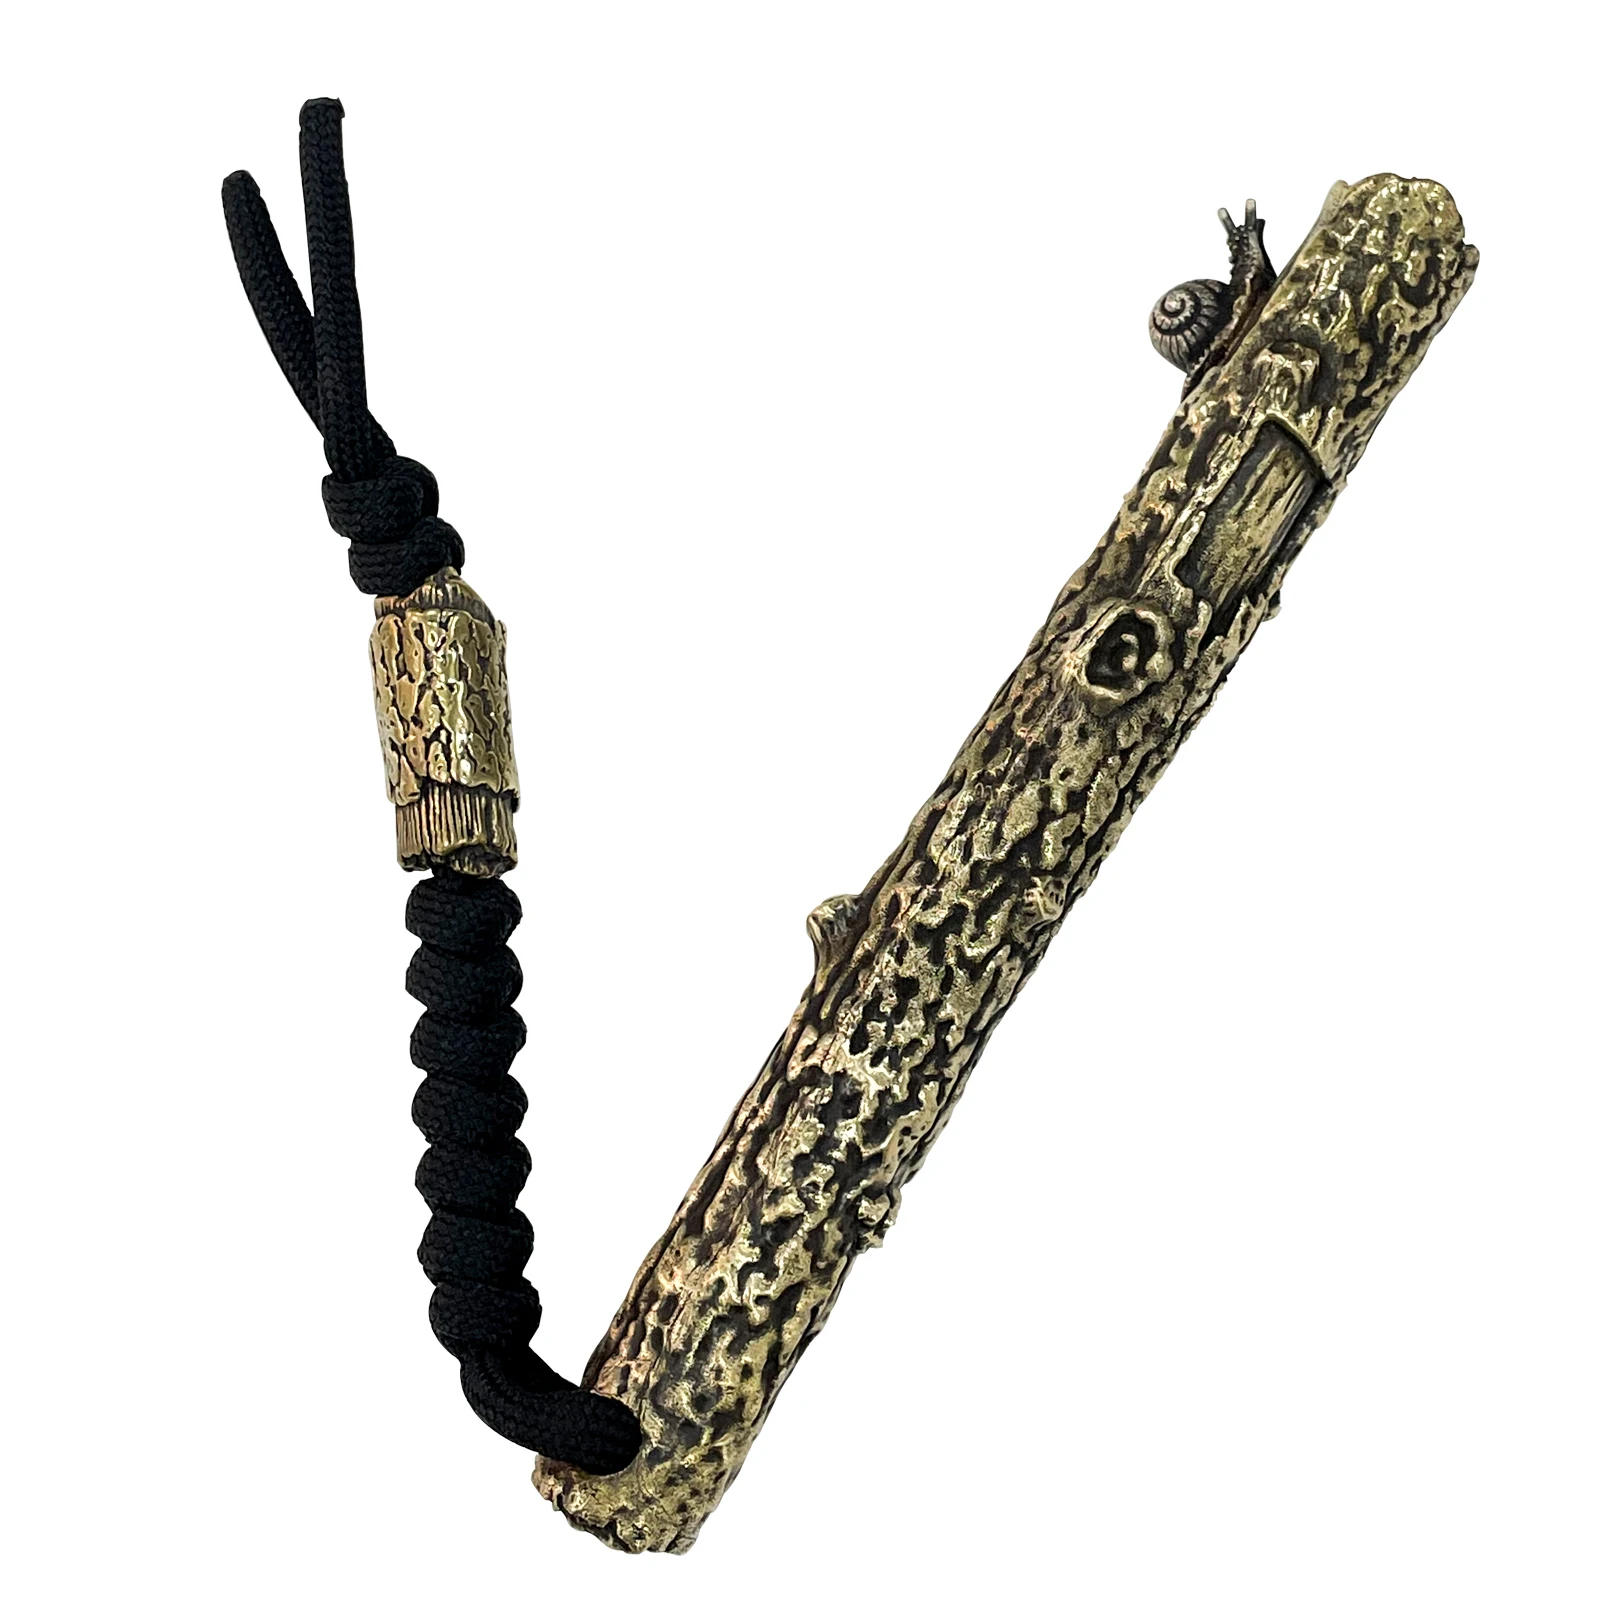 

EDC Brass Window Breaker Paracord Stick Wood with Snail Handmade Self Defense Tactical Outdoors Tools Hanging Camping Travel Men